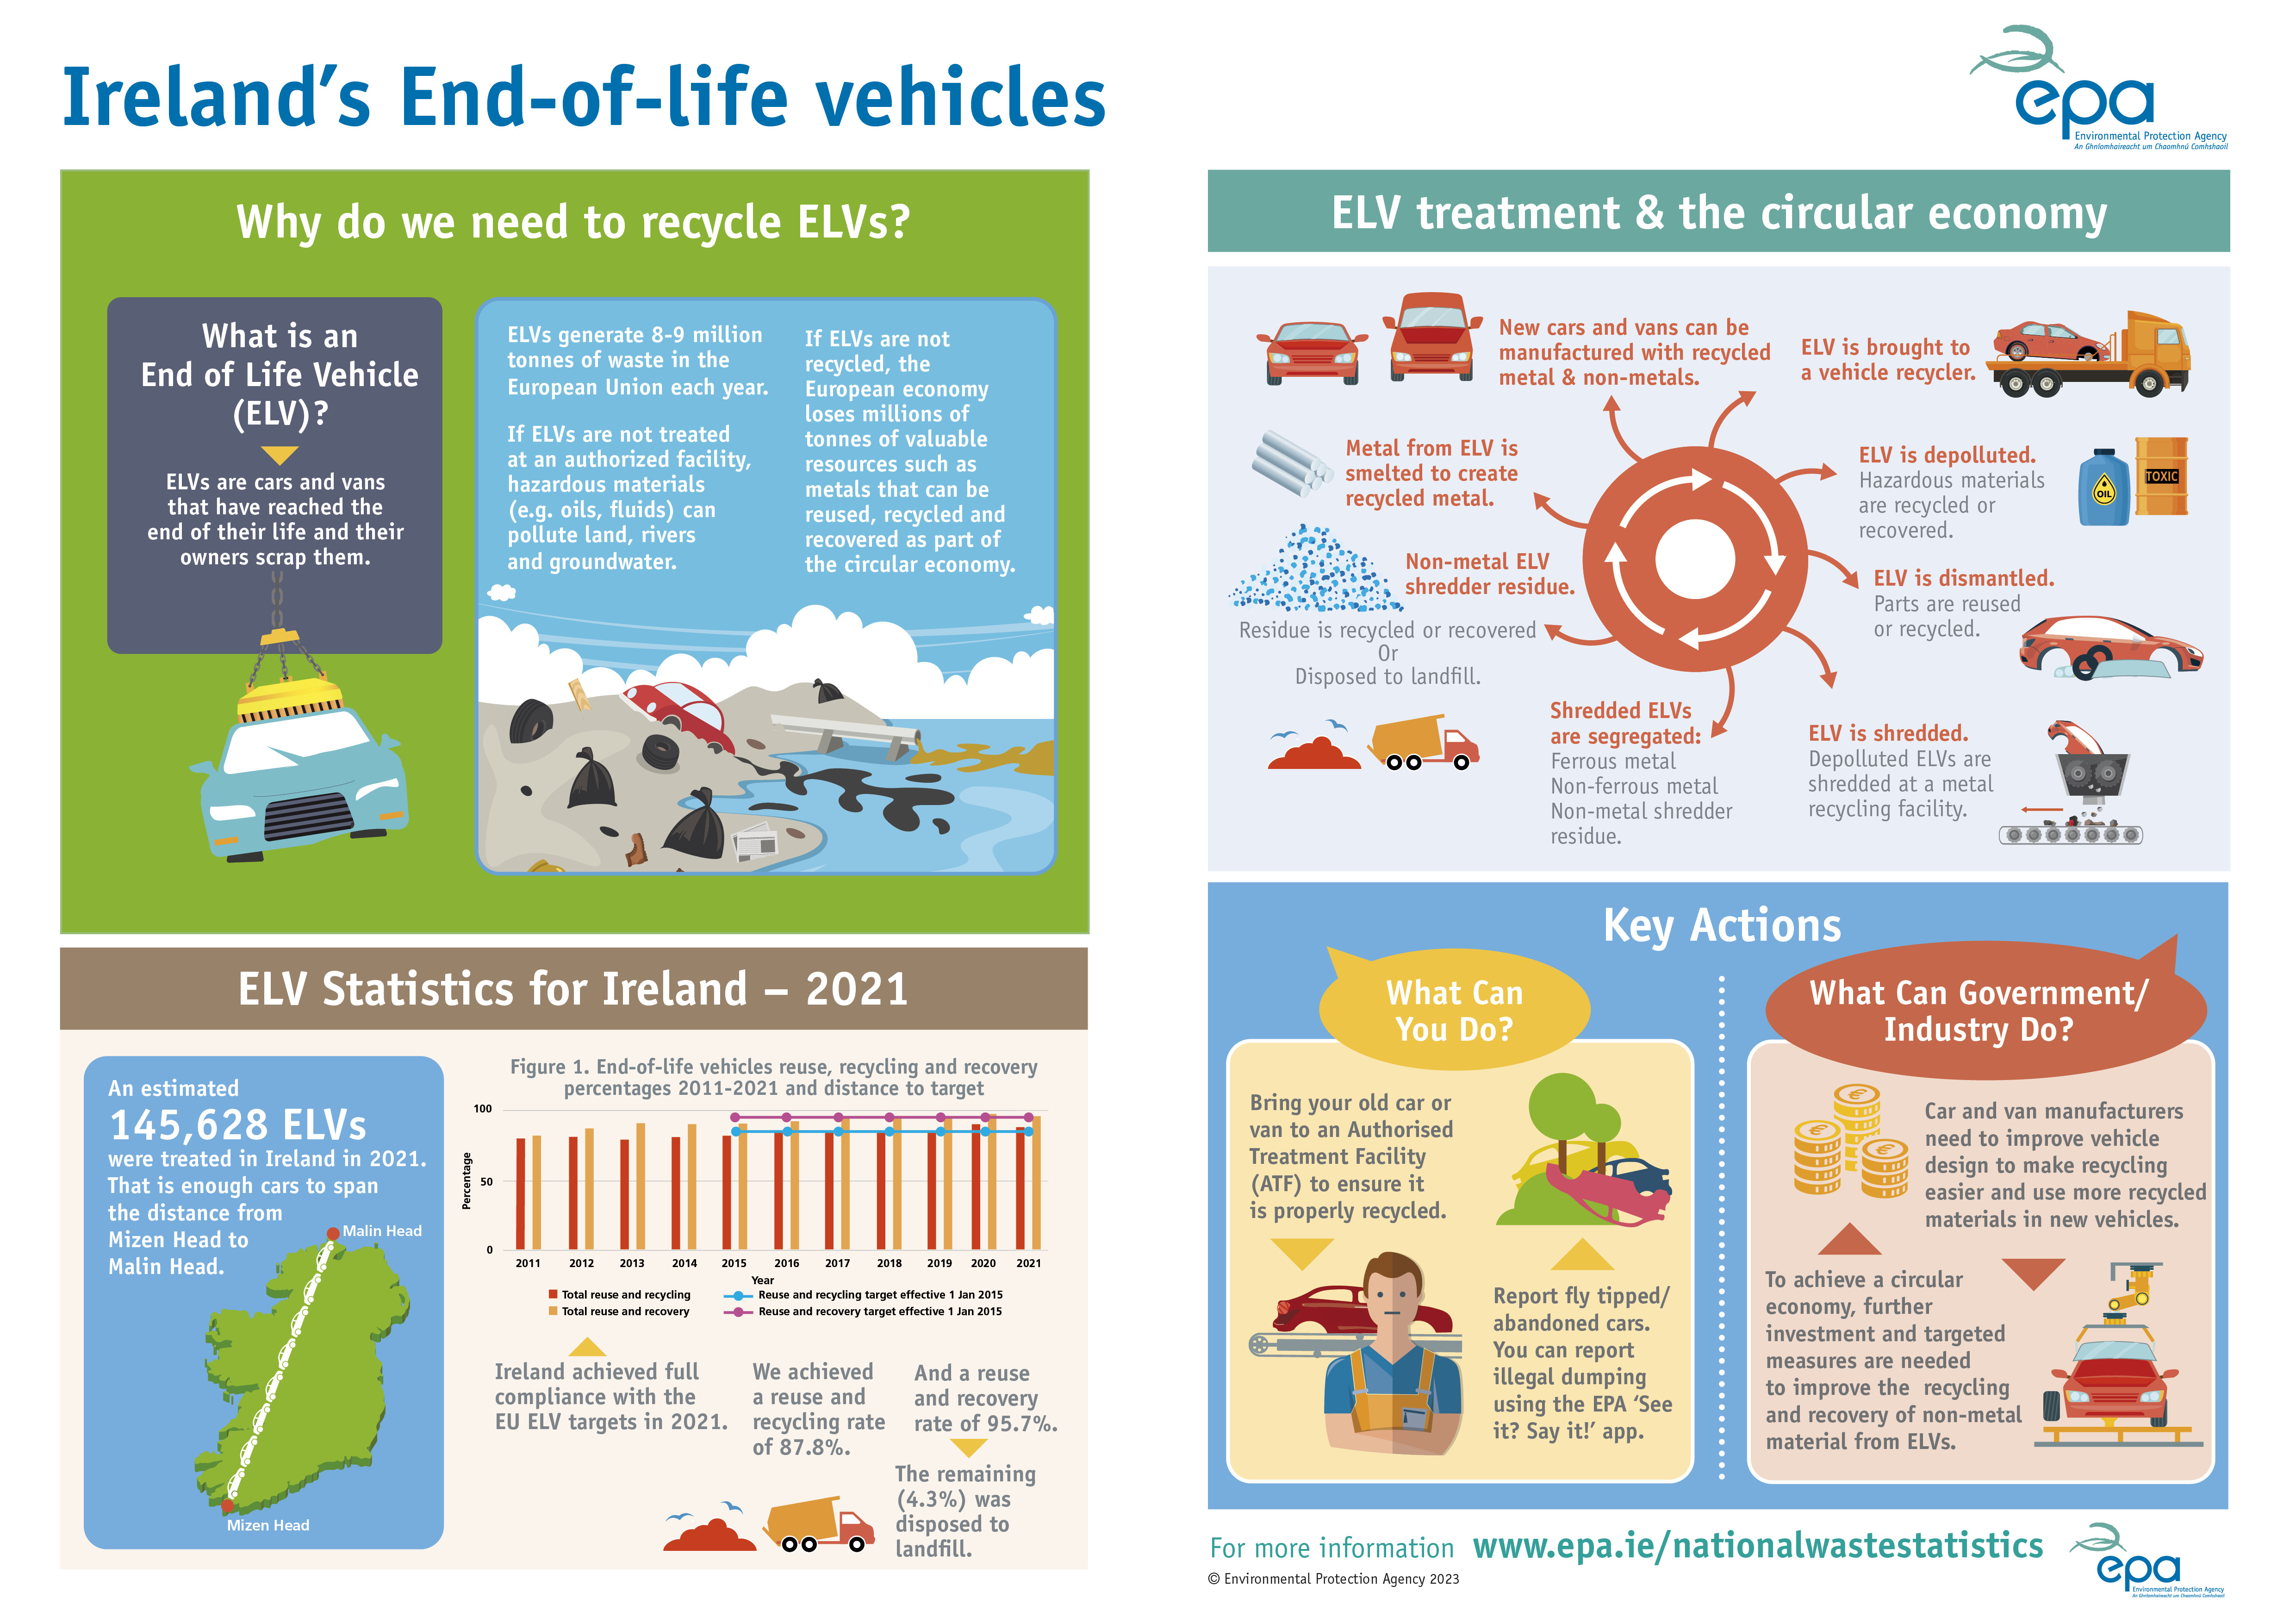 The ELV Infographic explains that ELVs are cars and vans that have reached the end of their life and their owners scrap them. The infographic provides information on why we need to recycle ELVs, how ELVs are treated in line with a circular economy, the ELV statistics for Ireland in 2021, as described on this webpage, and key actions that can be taken by car owners.